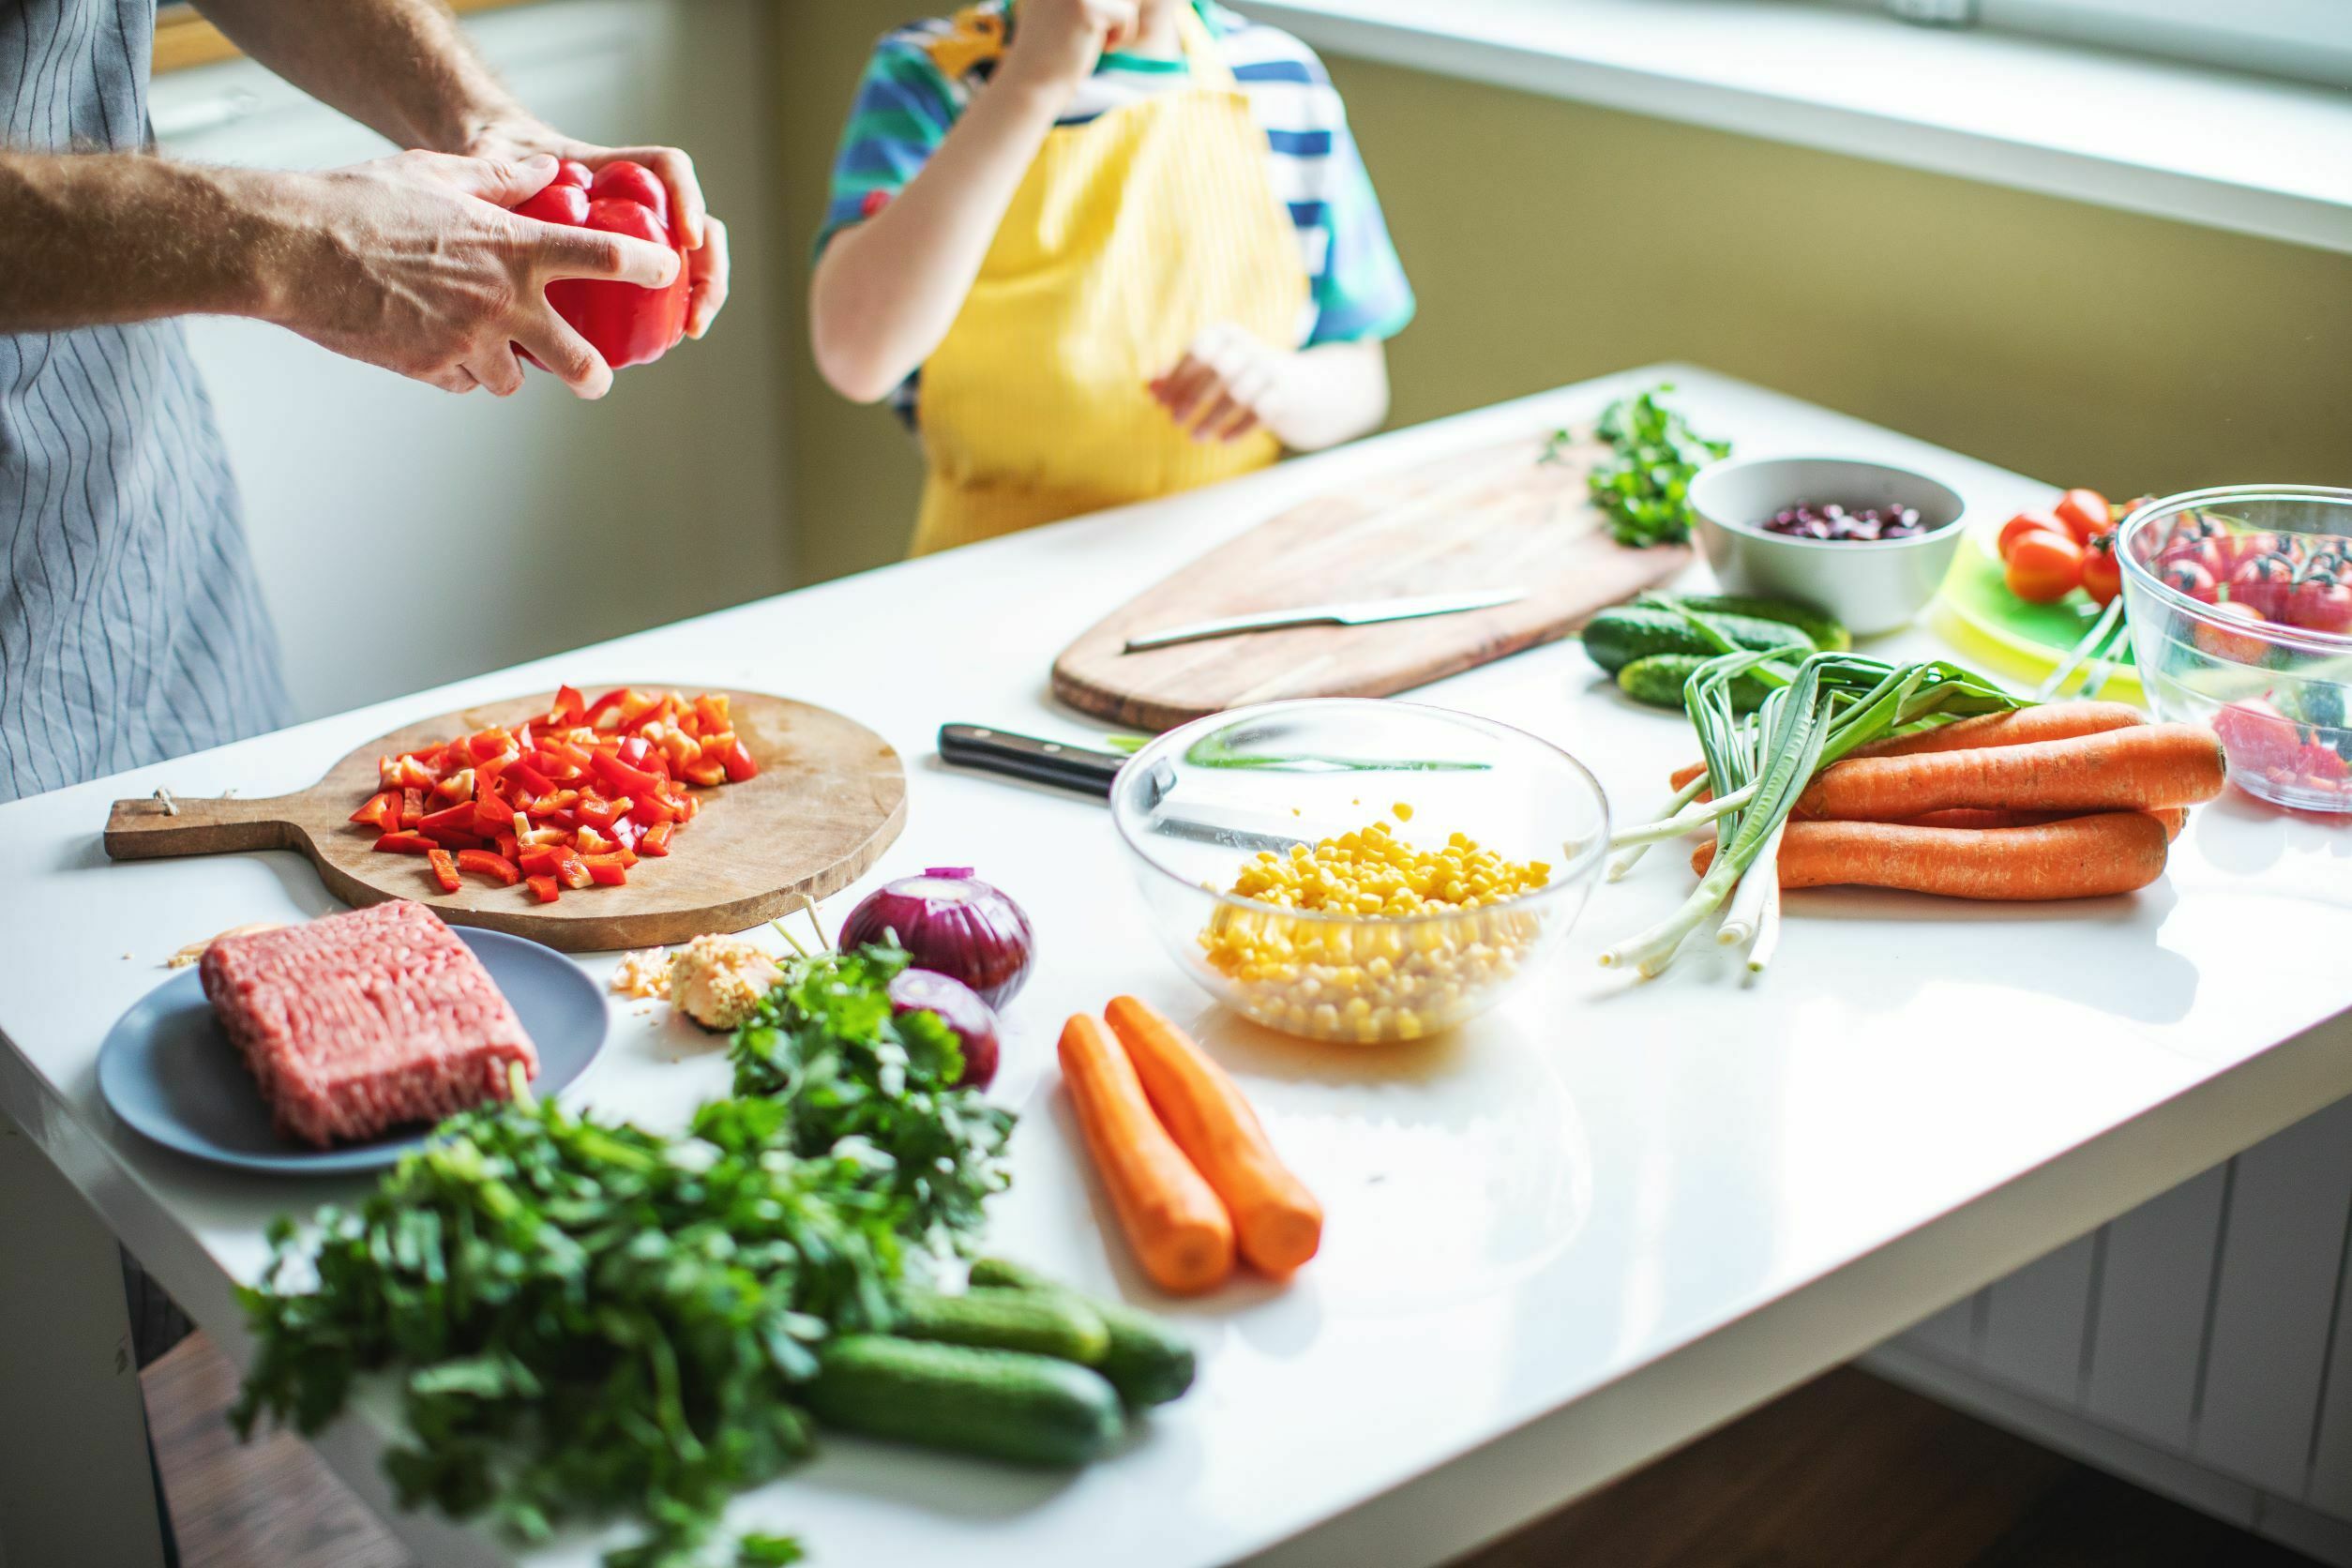 Let’s talk….cooking and its benefits for seniors